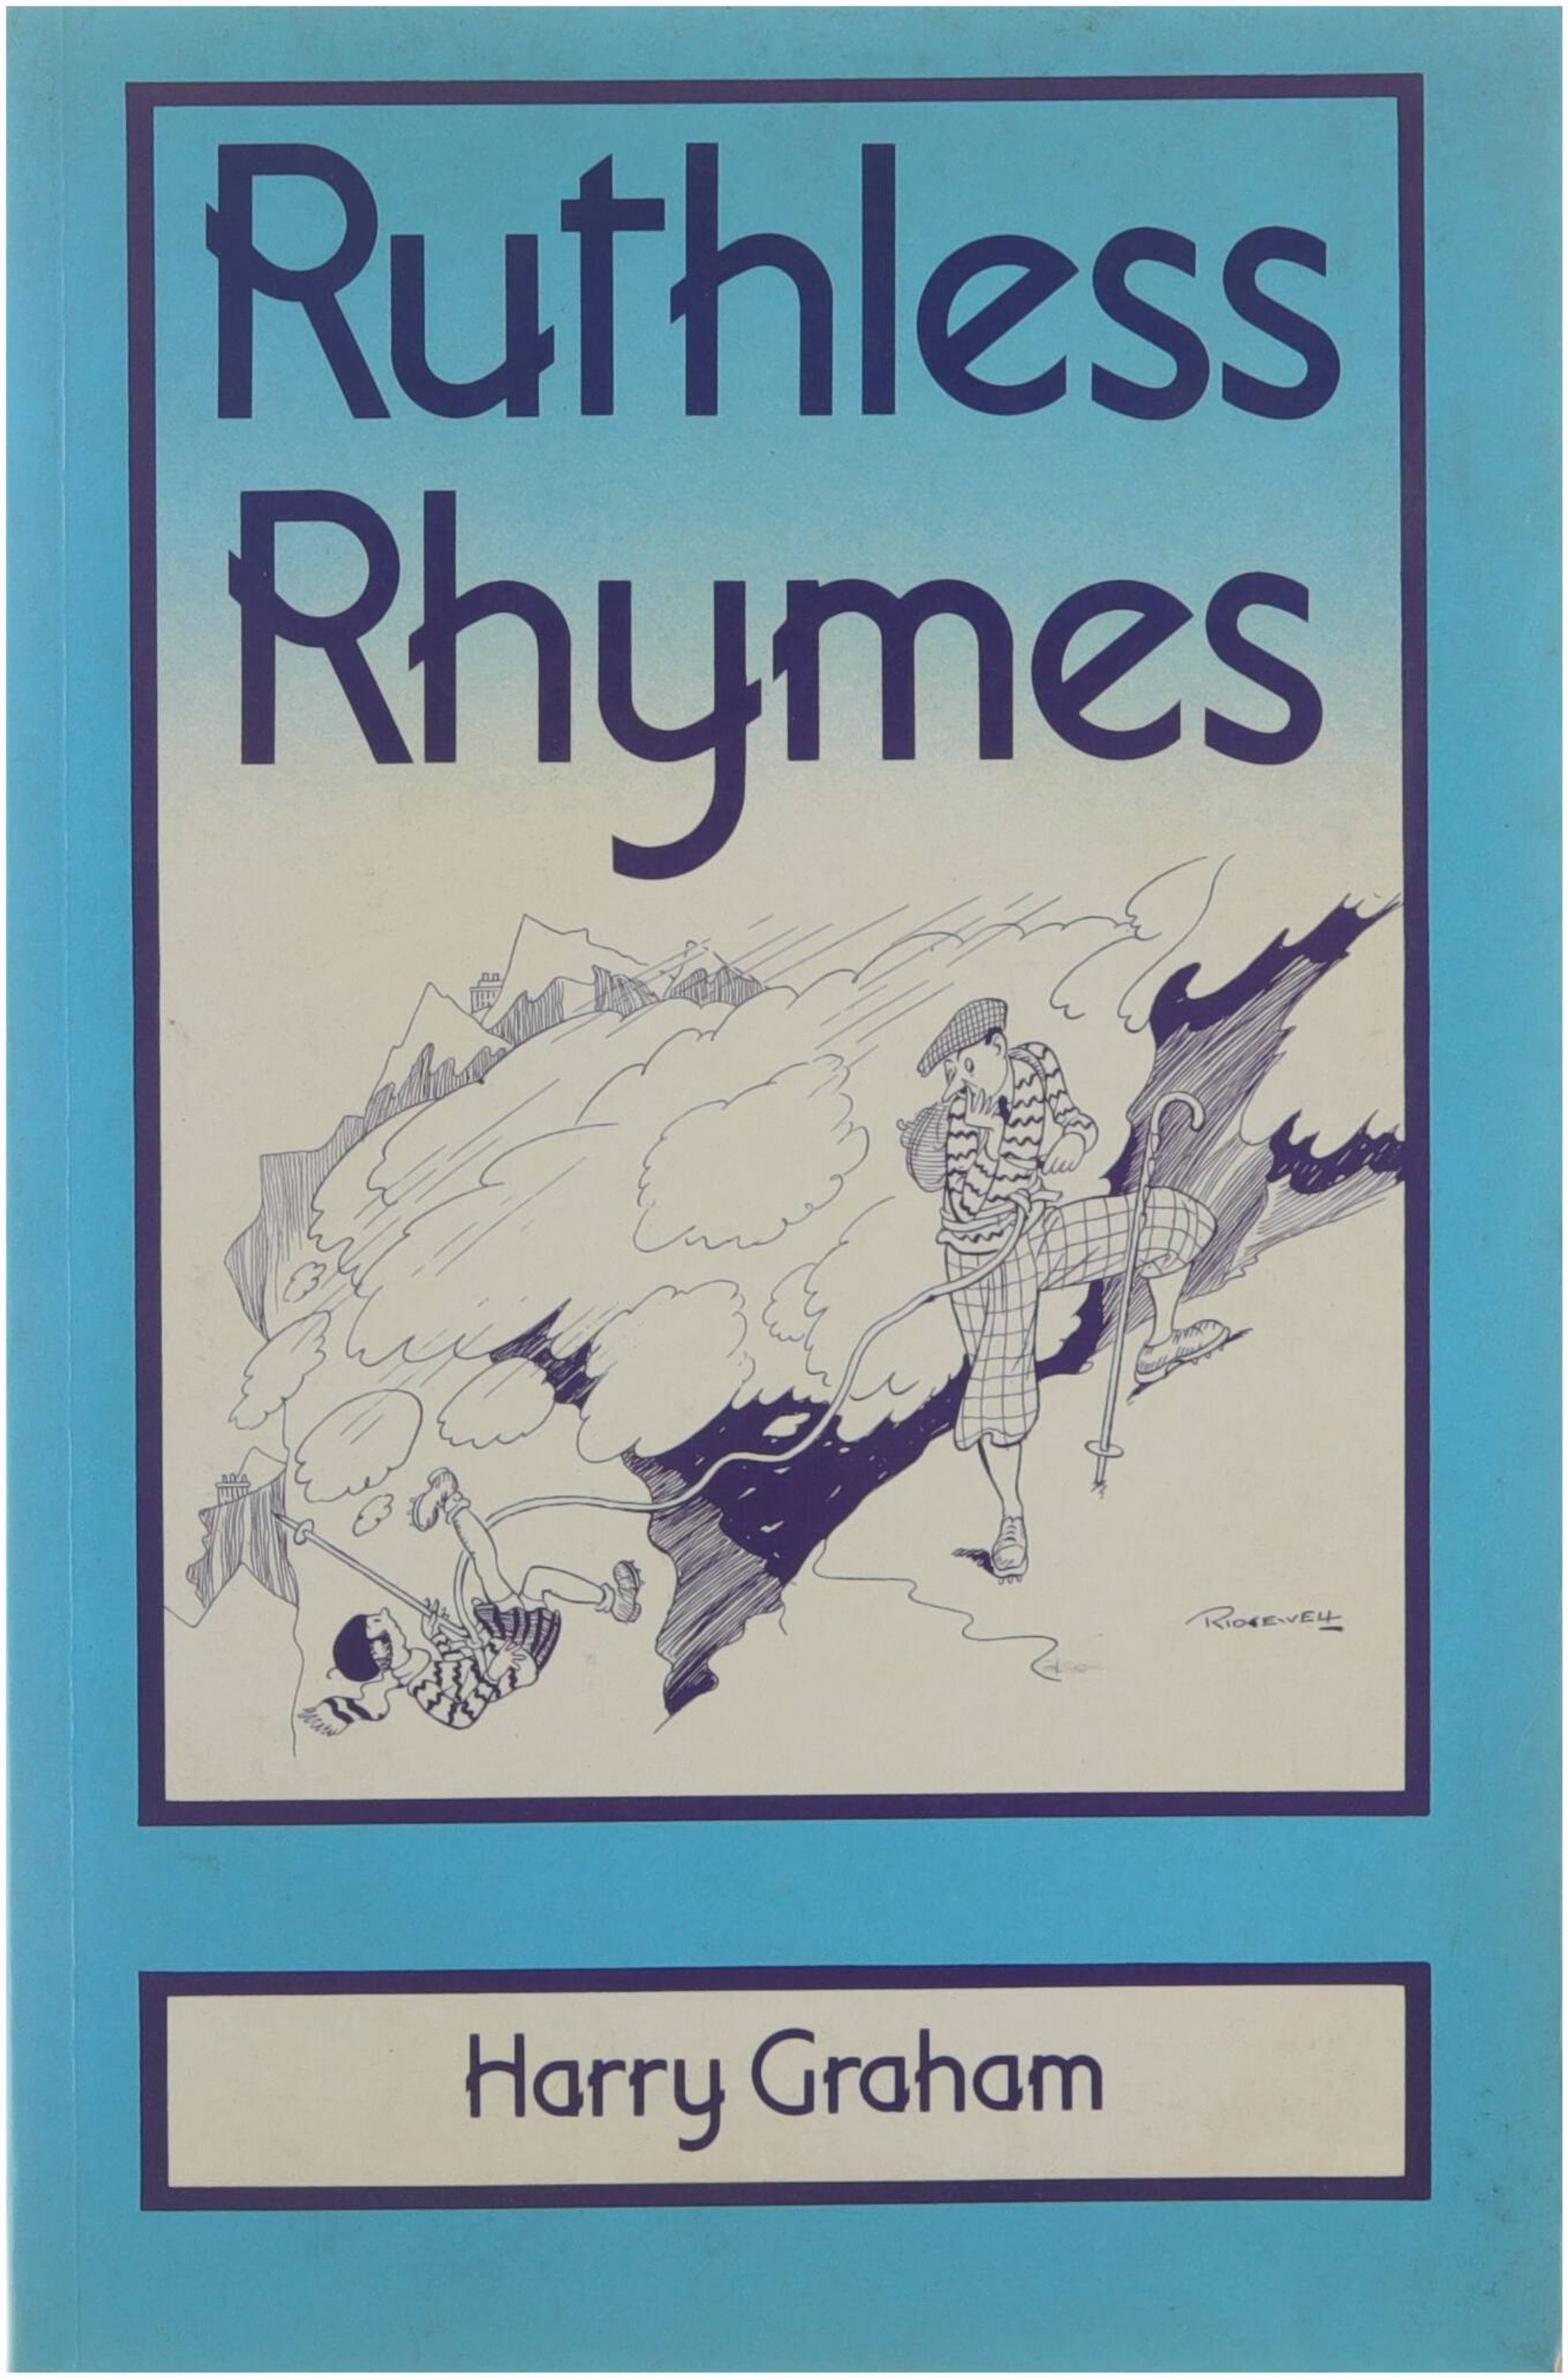 Ruthless rhymes - Graham Harry